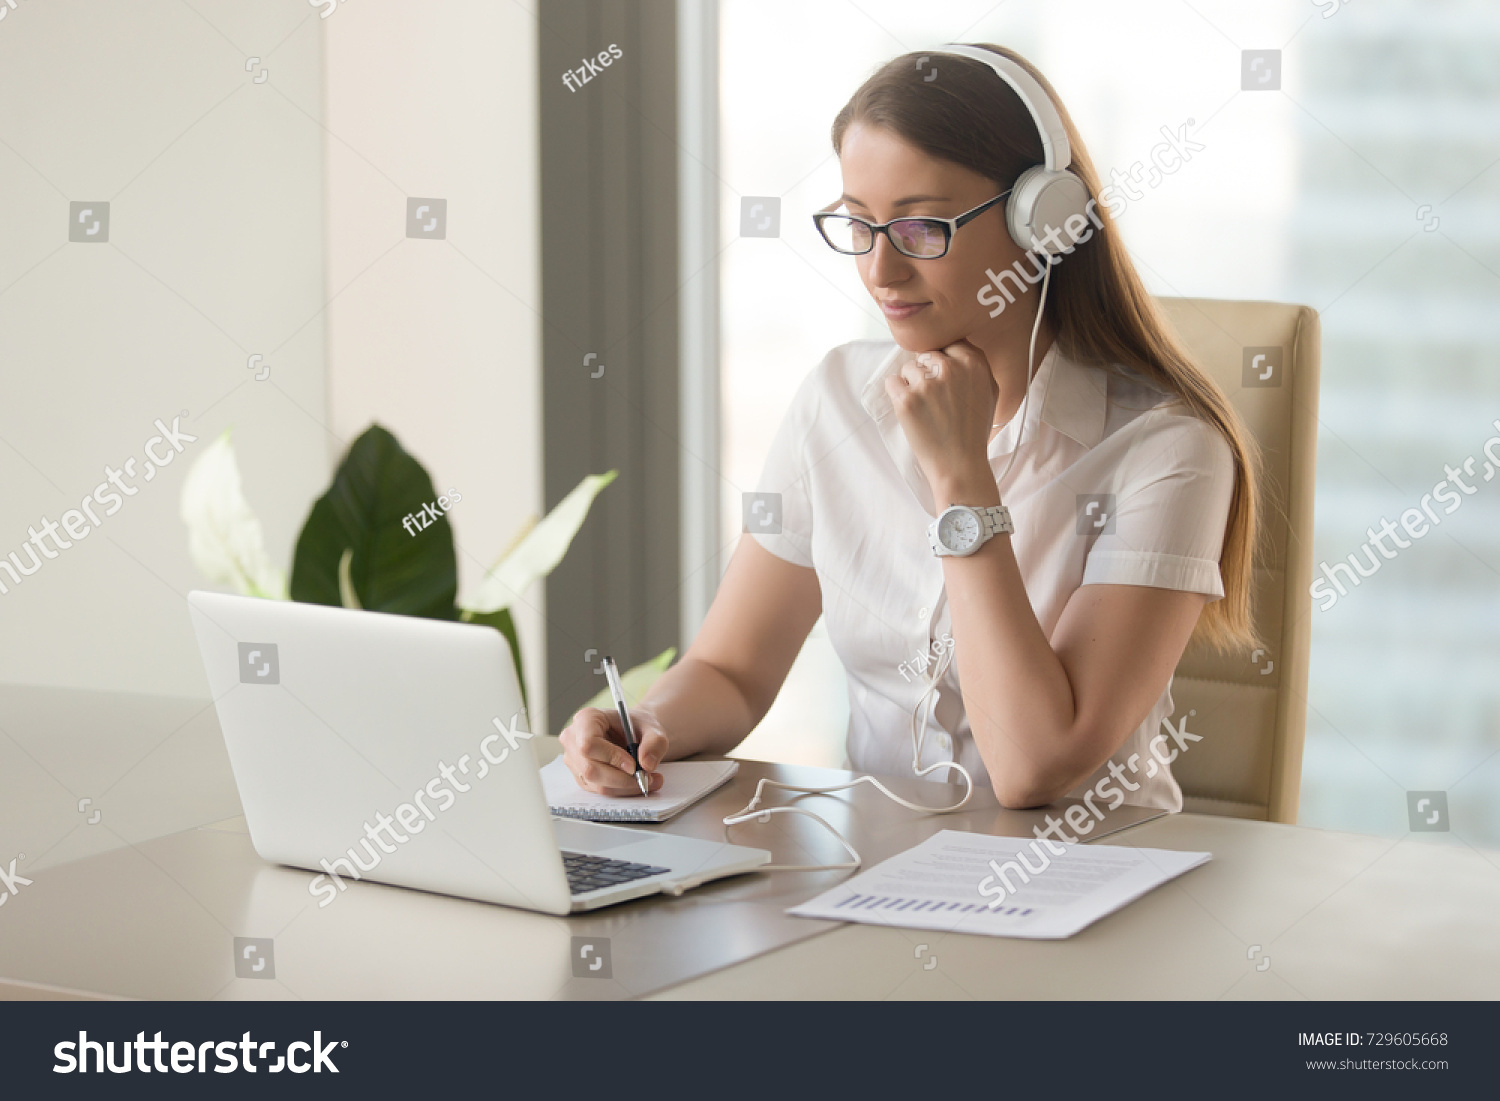 Focused attentive woman in headphones sits at desk with laptop, looks at screen, makes notes, learns foreign language in internet, online study course, self-education on web, consults client by video #729605668